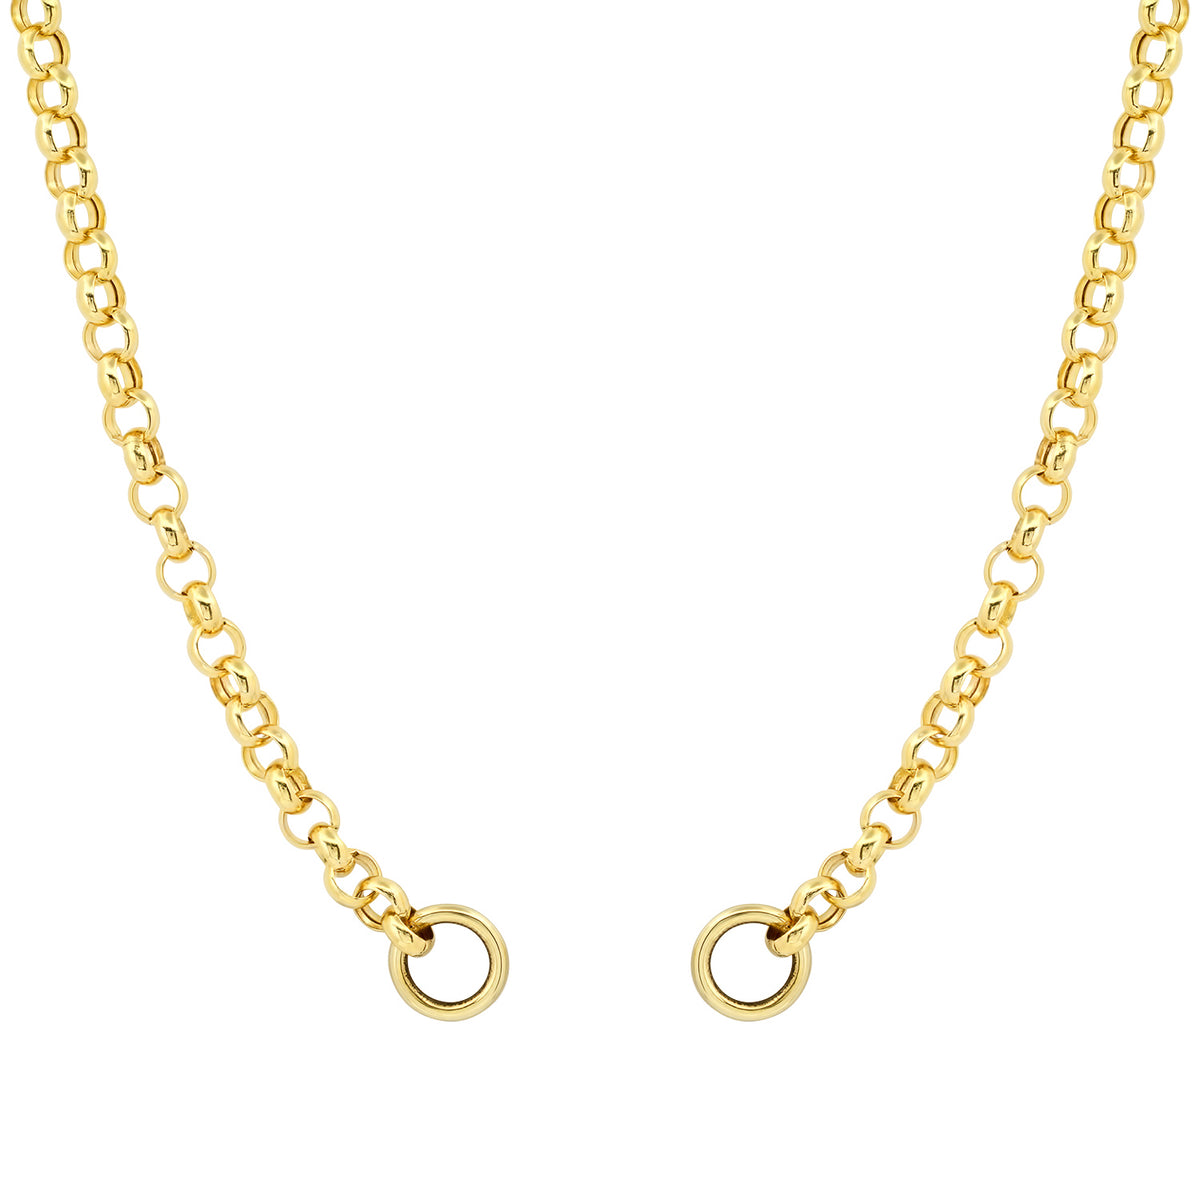 Gold Charm Necklace for Her With 2 Charm Holder Stations, Oval Rolo Link,  Personalized Necklace